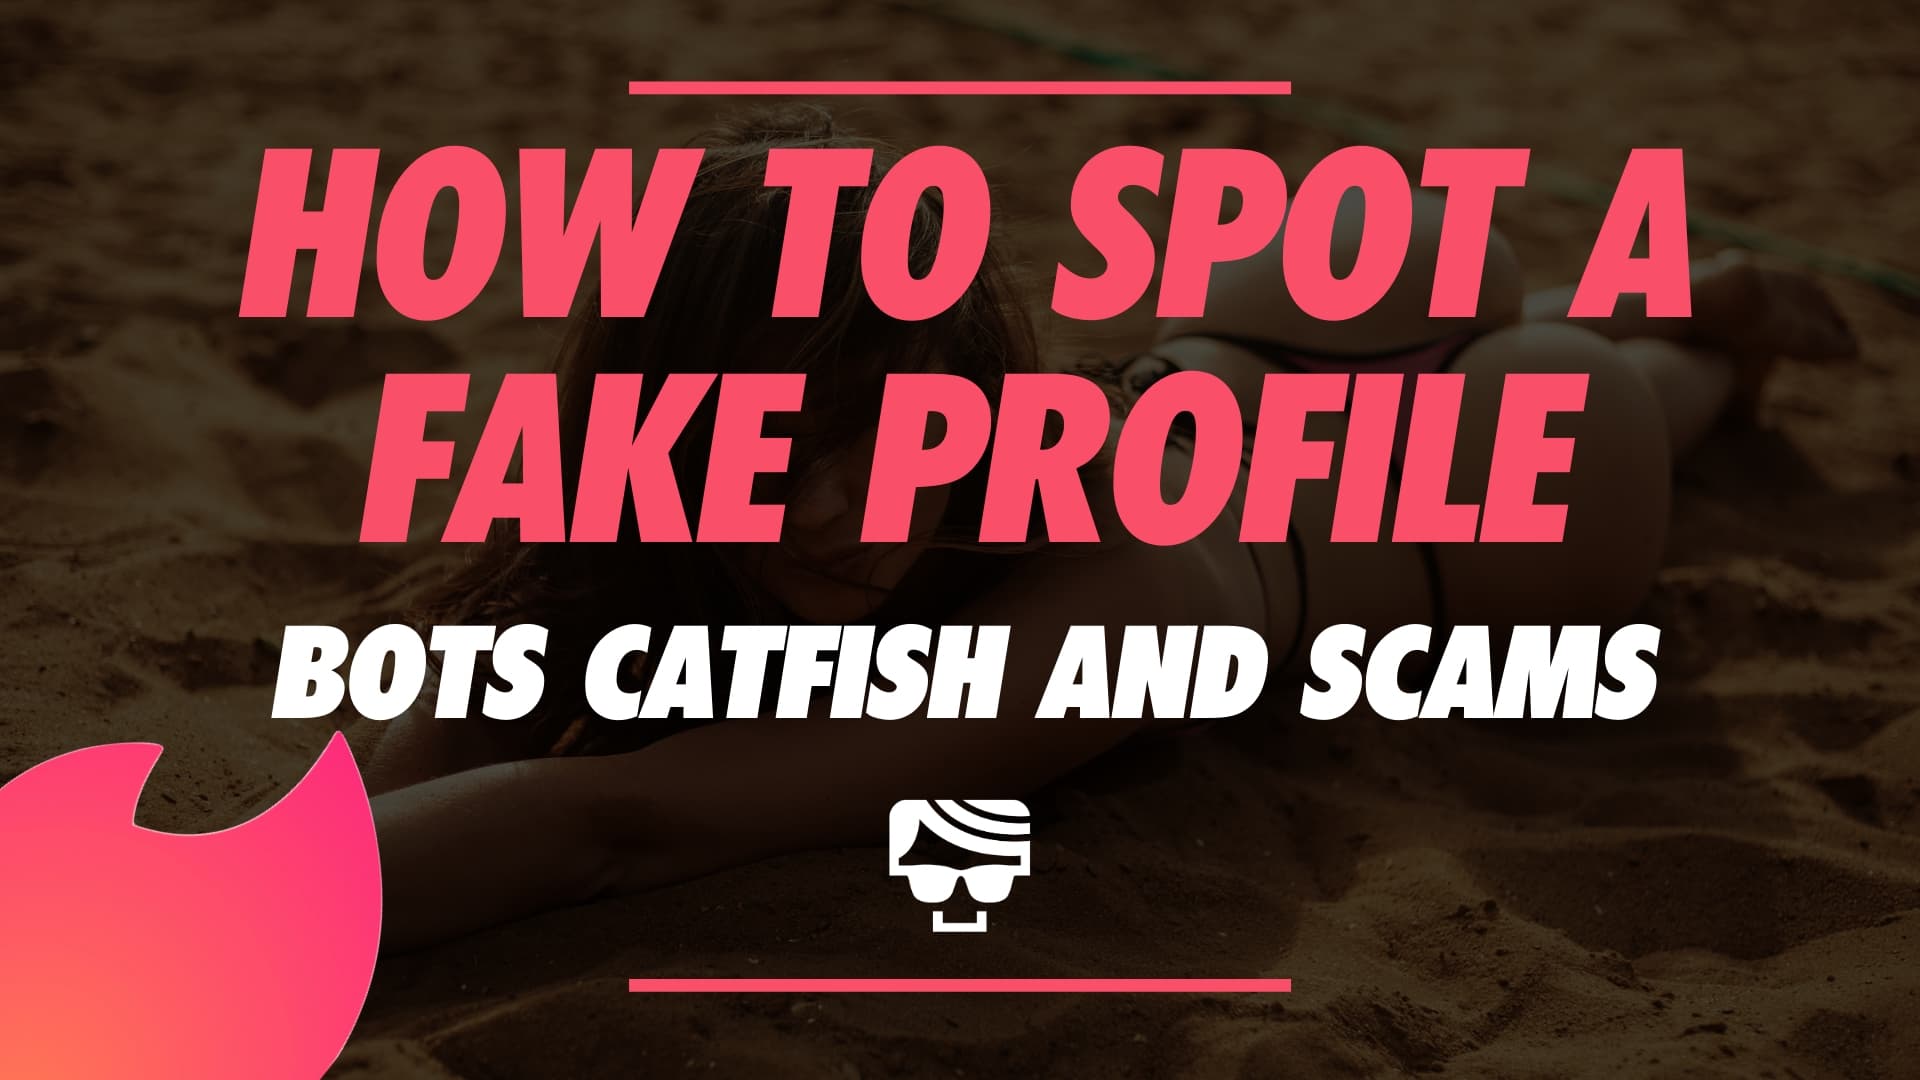 How To Spot Fake Tinder Profiles, Bots, Catfish And Scams In 2022